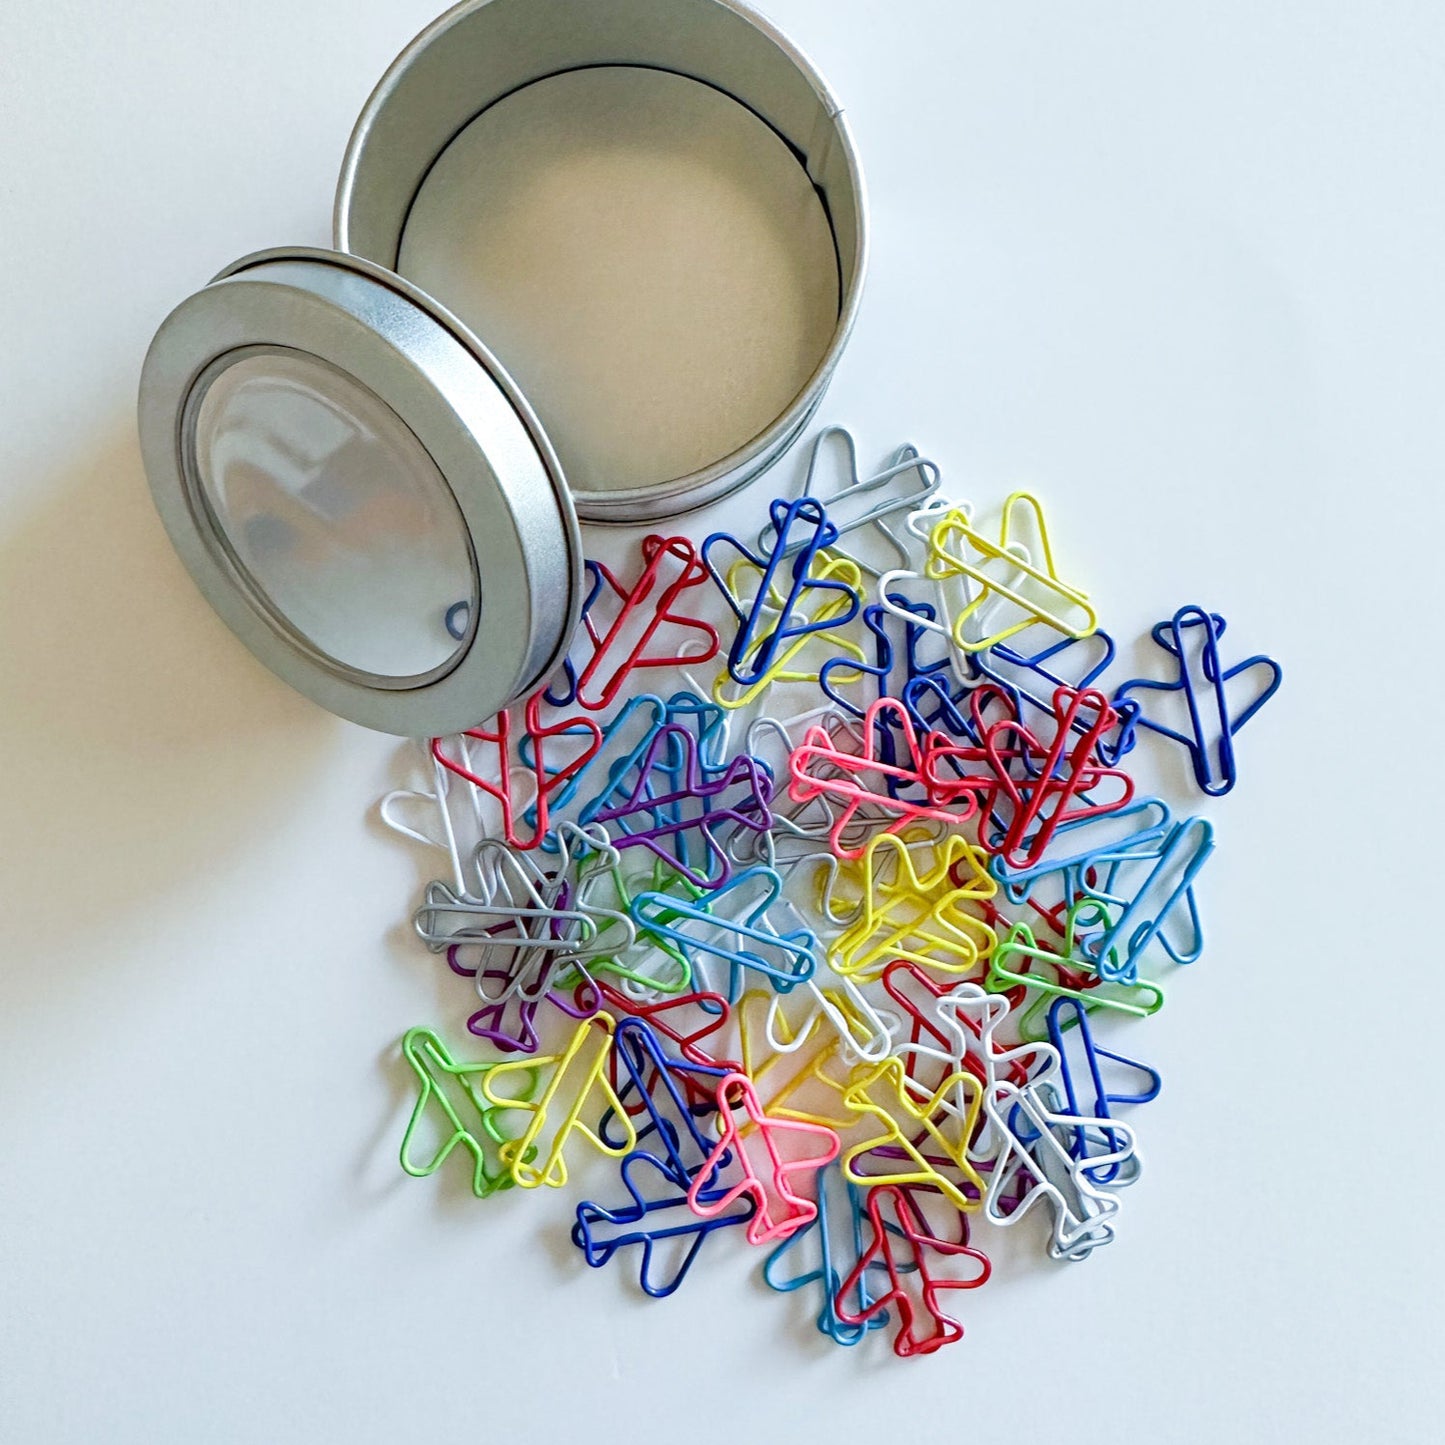 Cute Airplane Paperclips - 50 pcs.